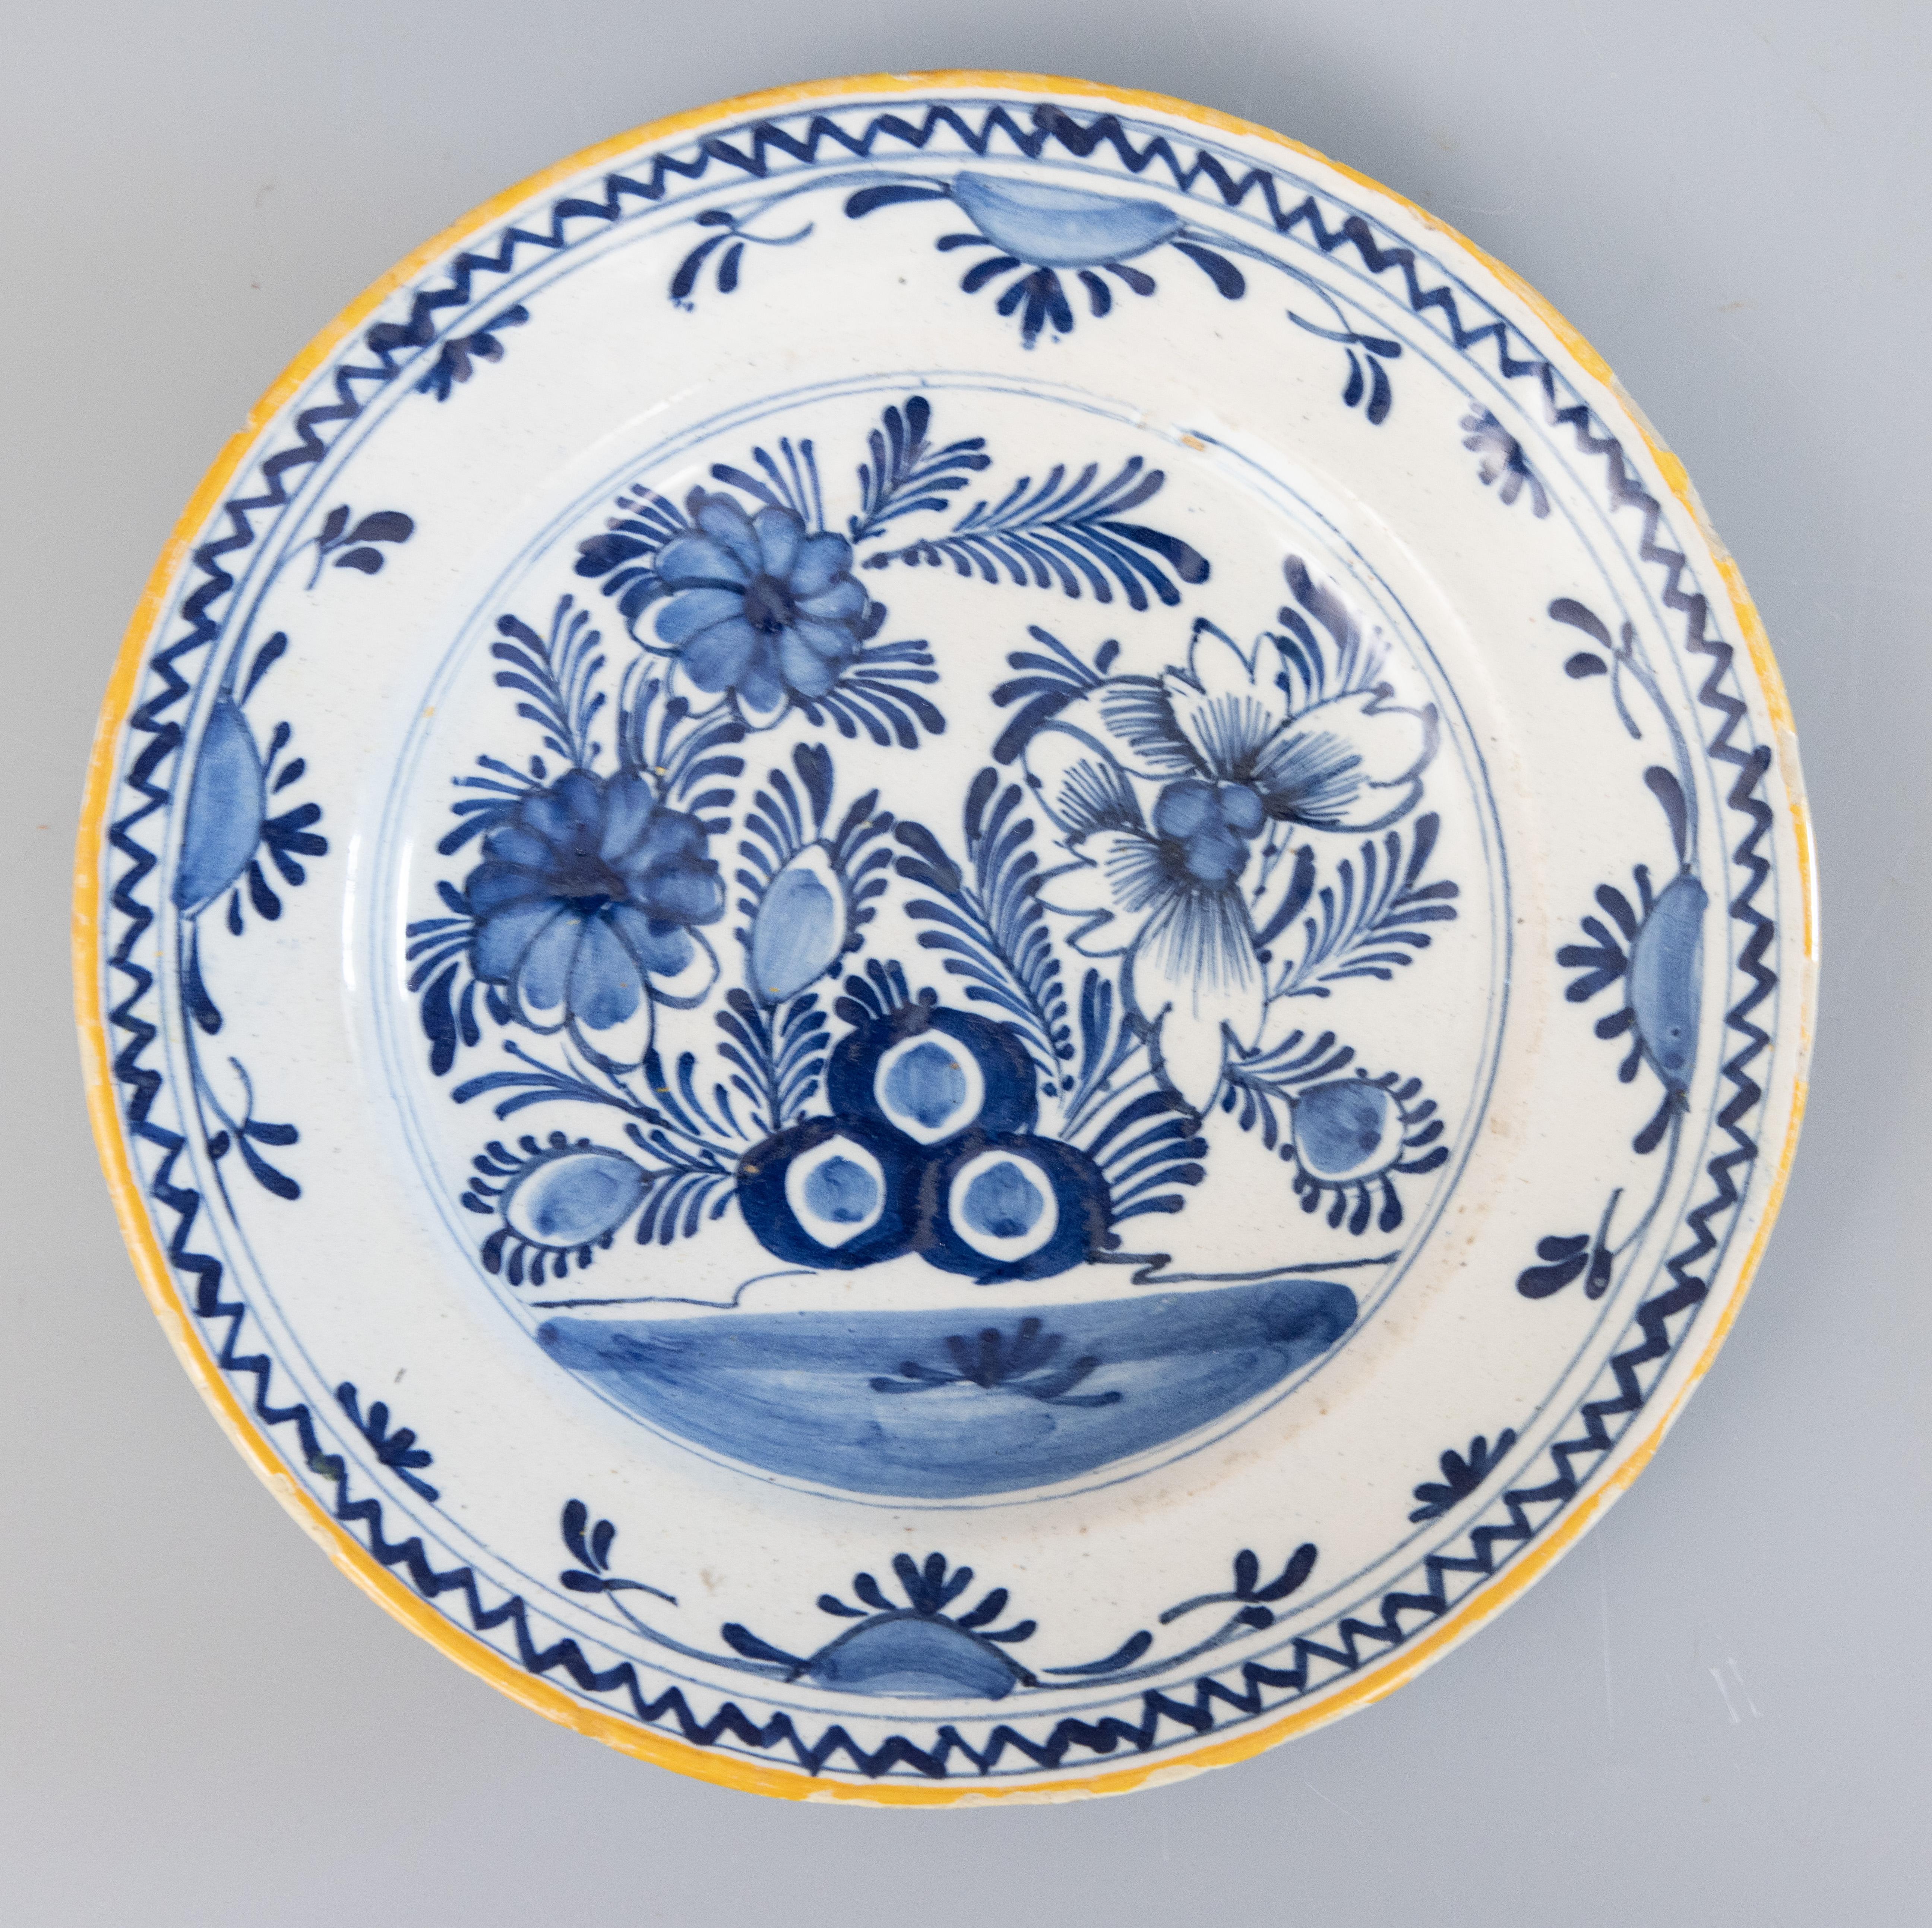 A gorgeous pair of antique 18th-Century Dutch Delft faience flower garden plates. These lovely plates have a hand painted floral and foliate design in cobalt blue and white with yellow gold rims. They would look fabulous displayed on a wall or in a